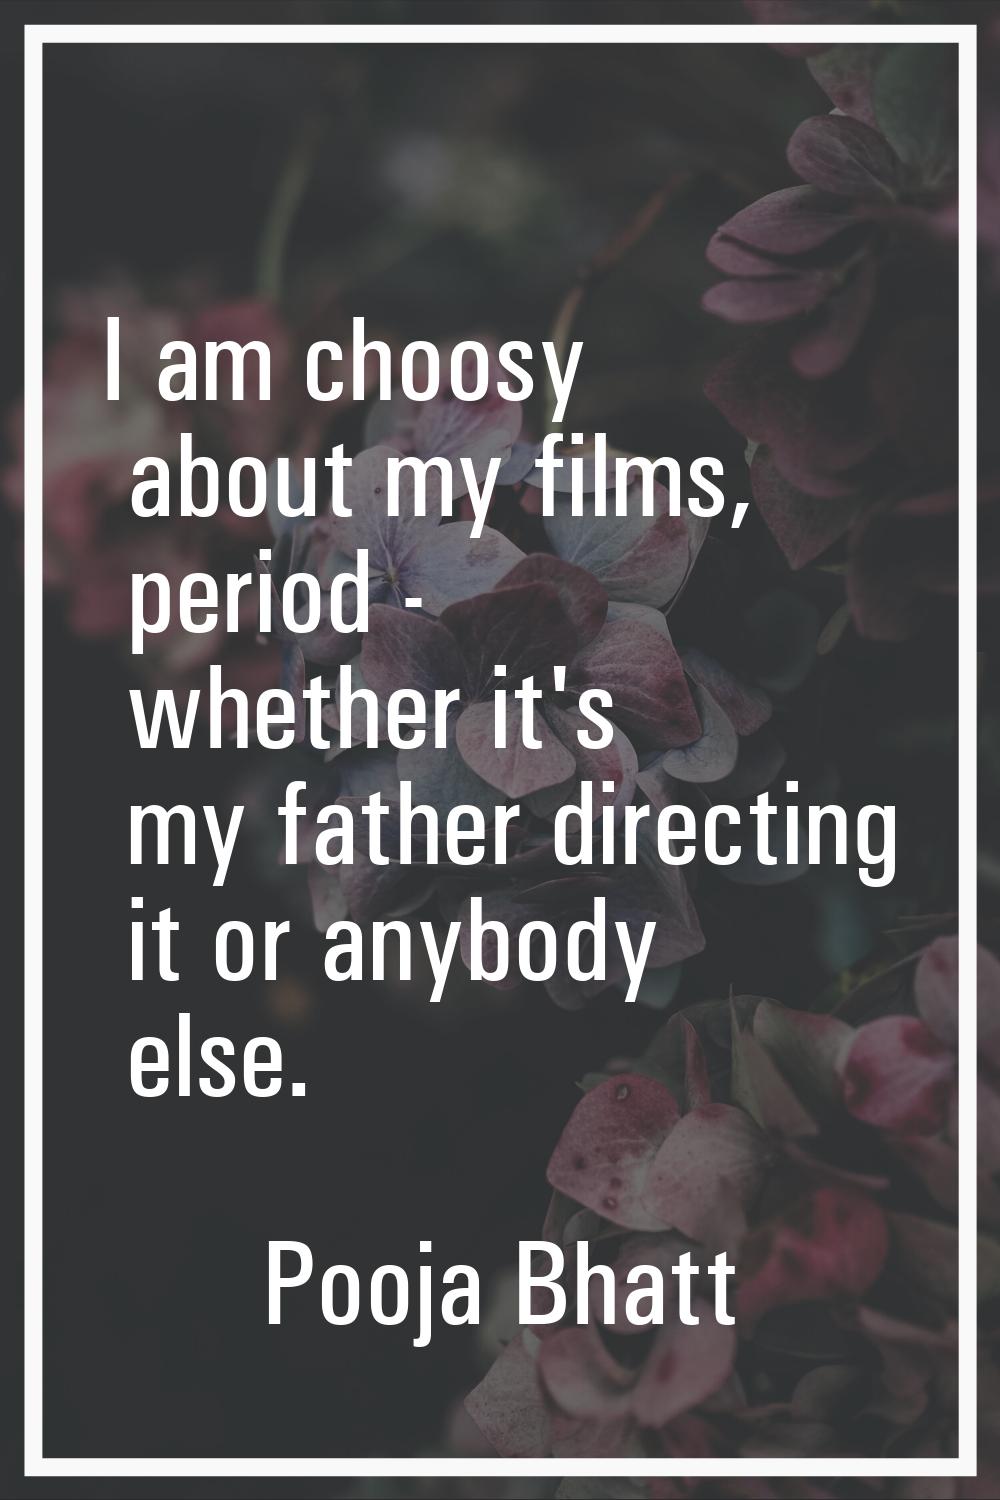 I am choosy about my films, period - whether it's my father directing it or anybody else.